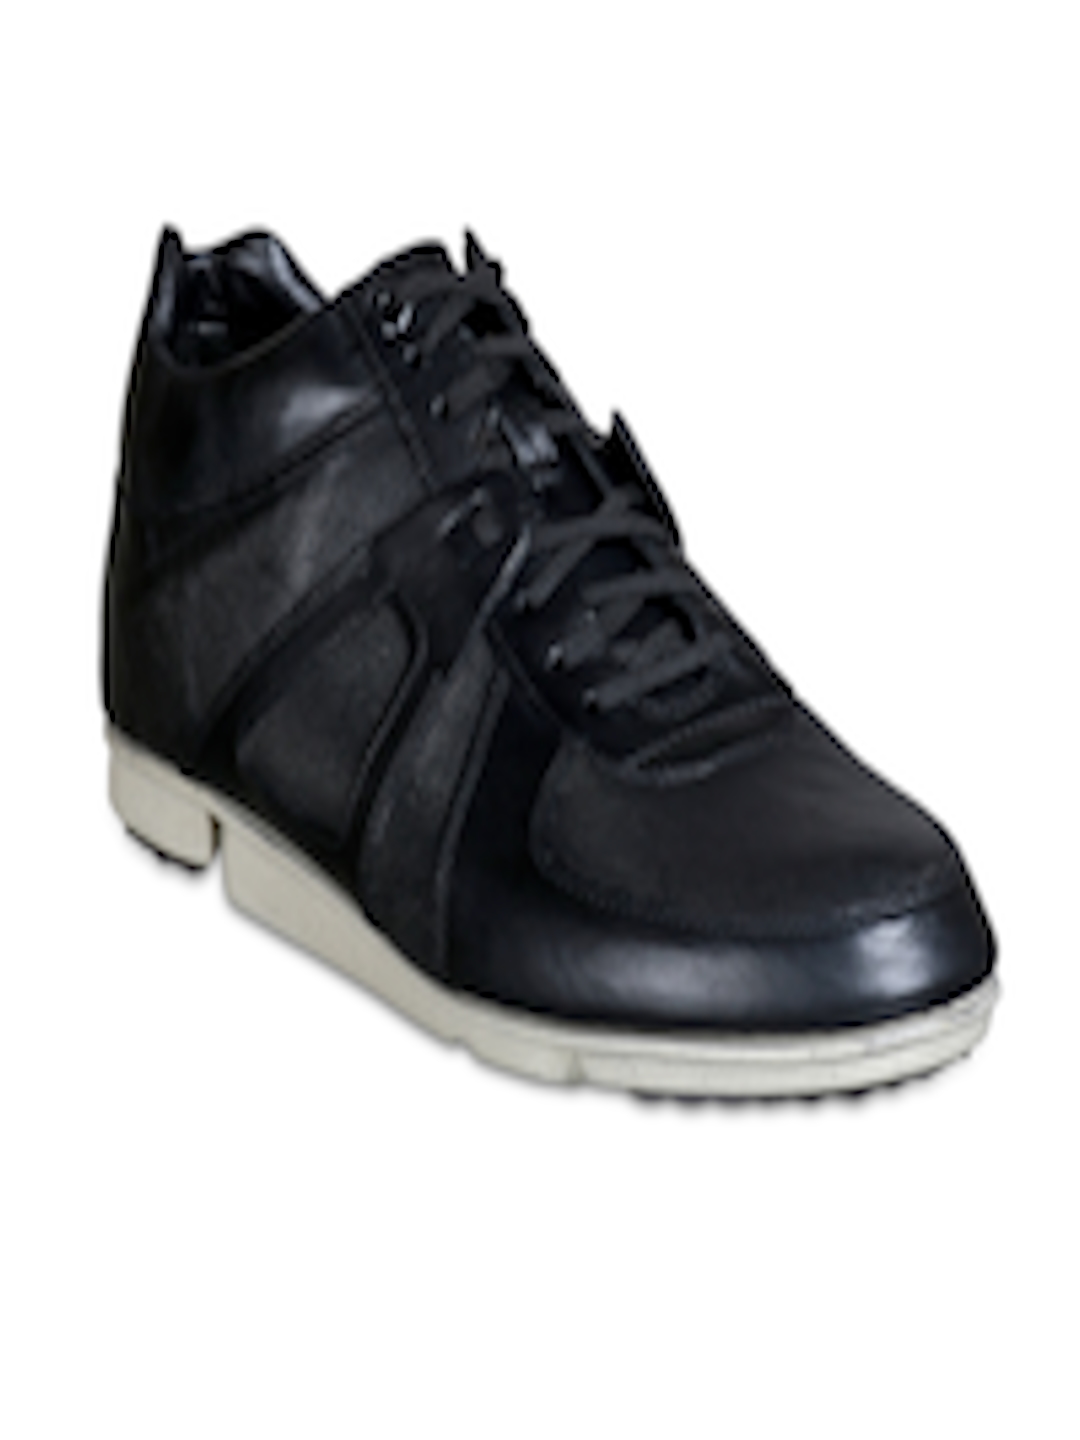 Buy Clarks Men Black Leather Sneakers - Casual Shoes for Men 6545105 ...